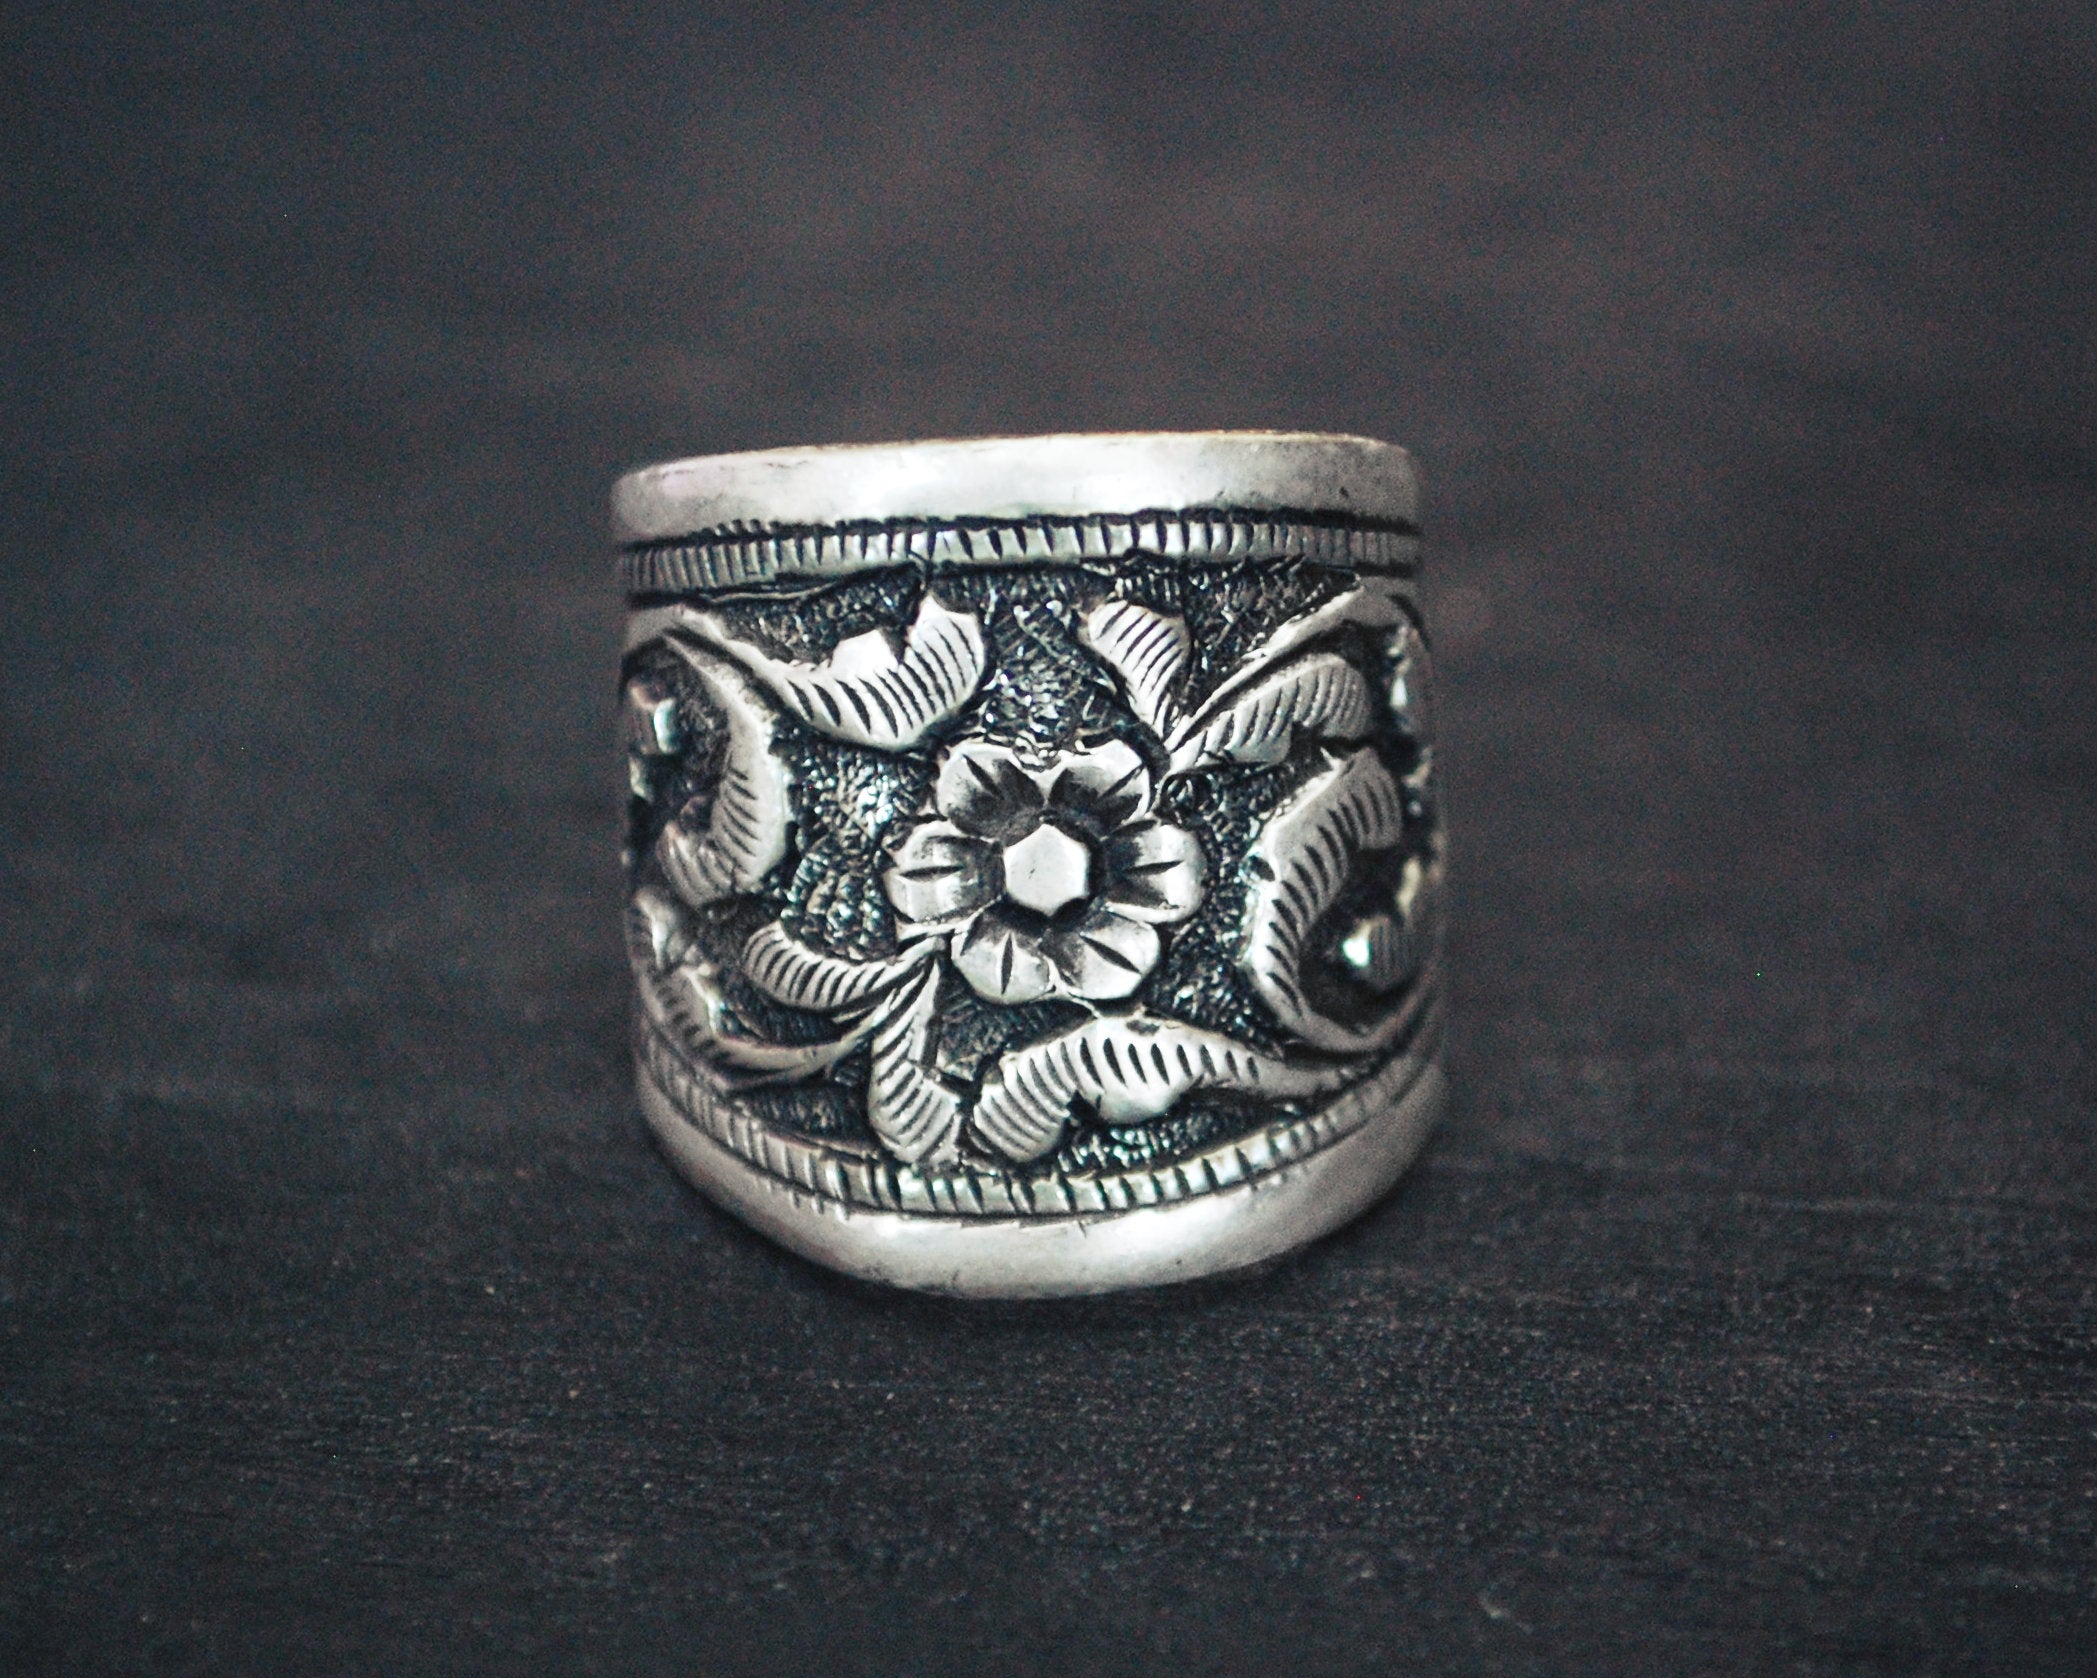 Ethnic Band Ring from India - Size 10